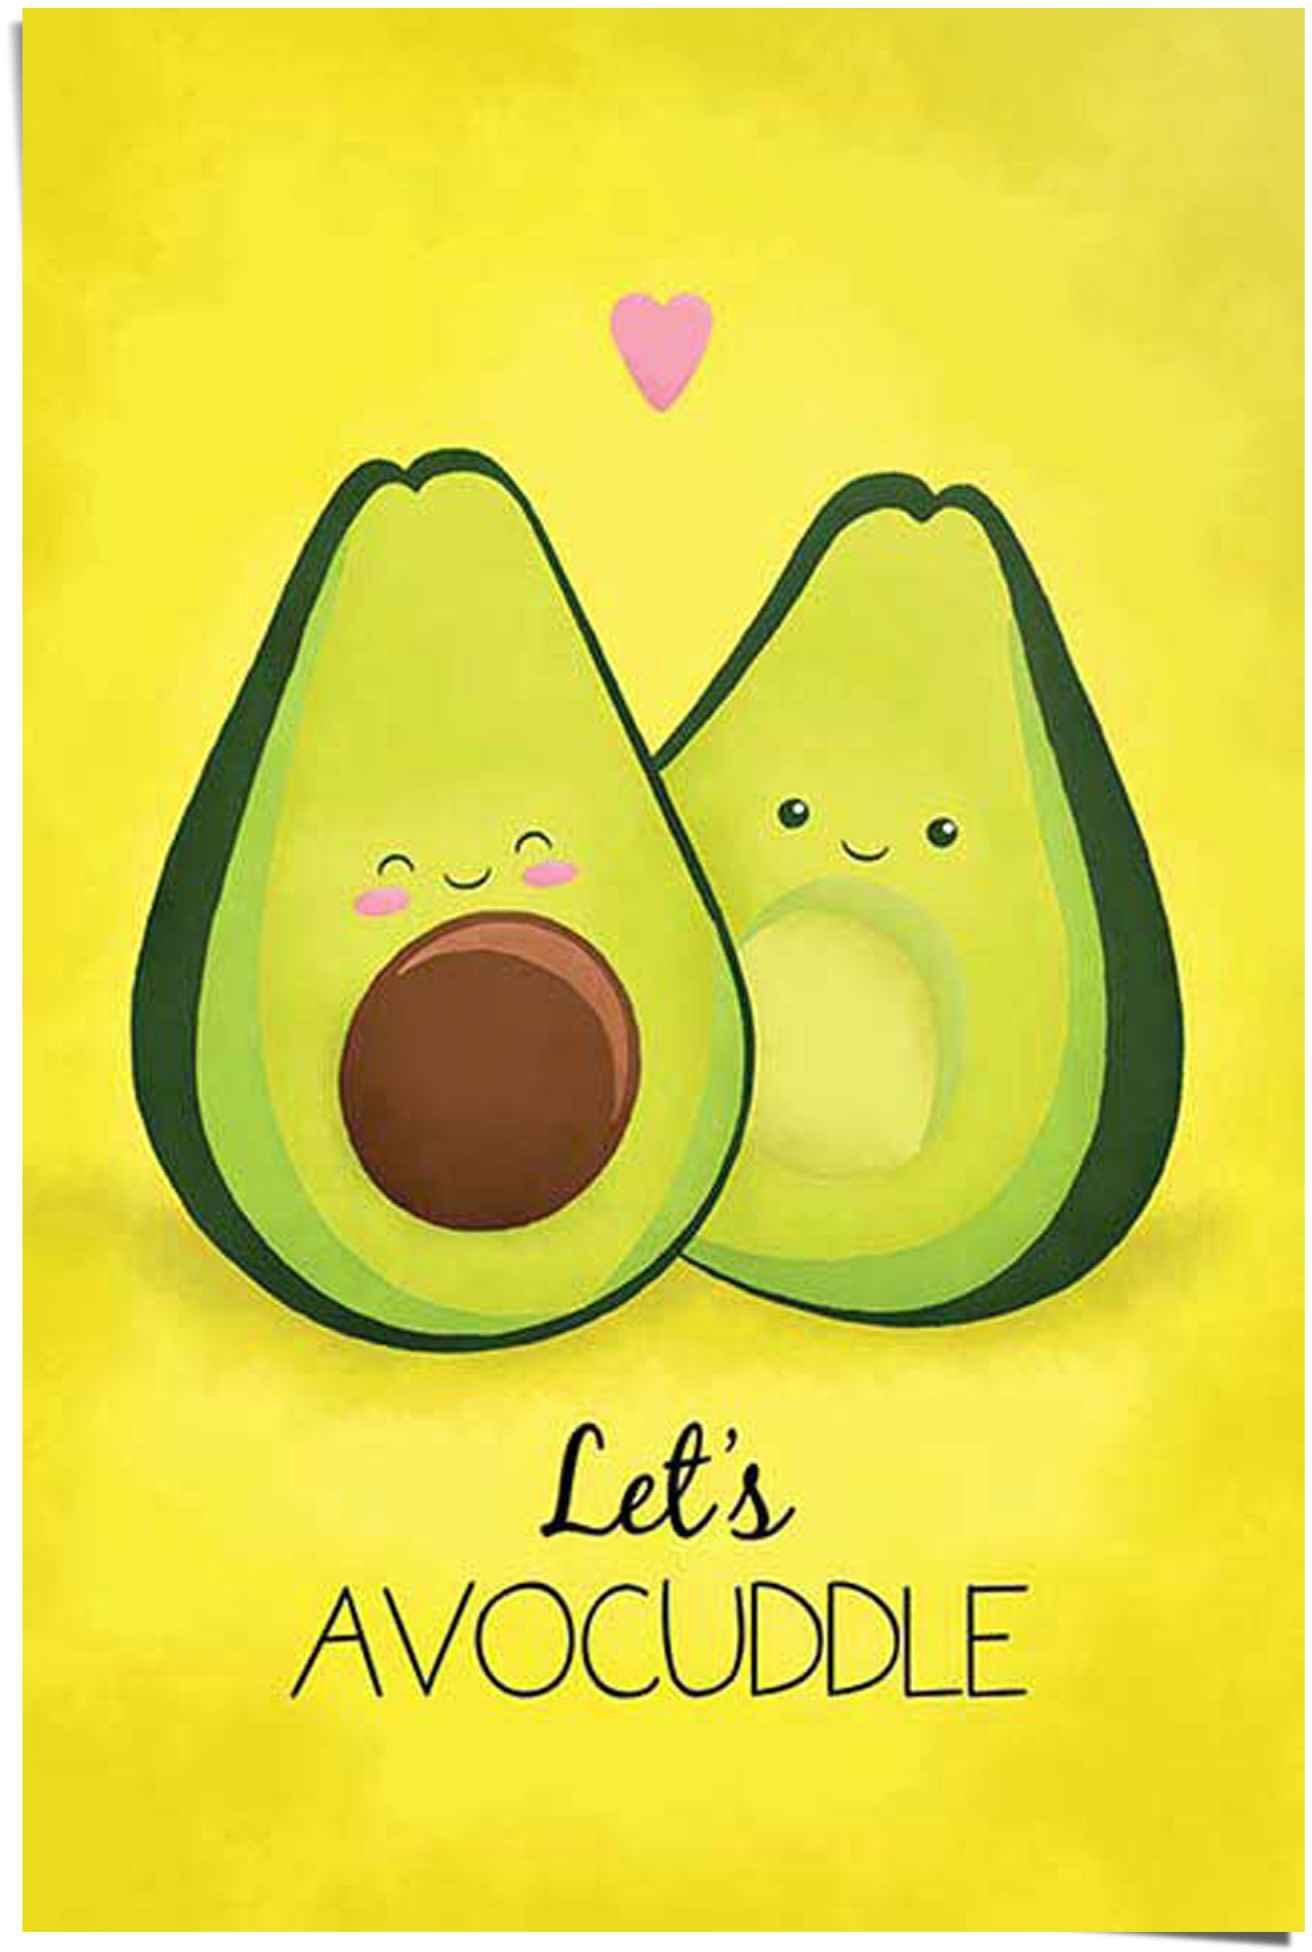 Reinders! Poster Avocado avocuddle, St) (1 let´s